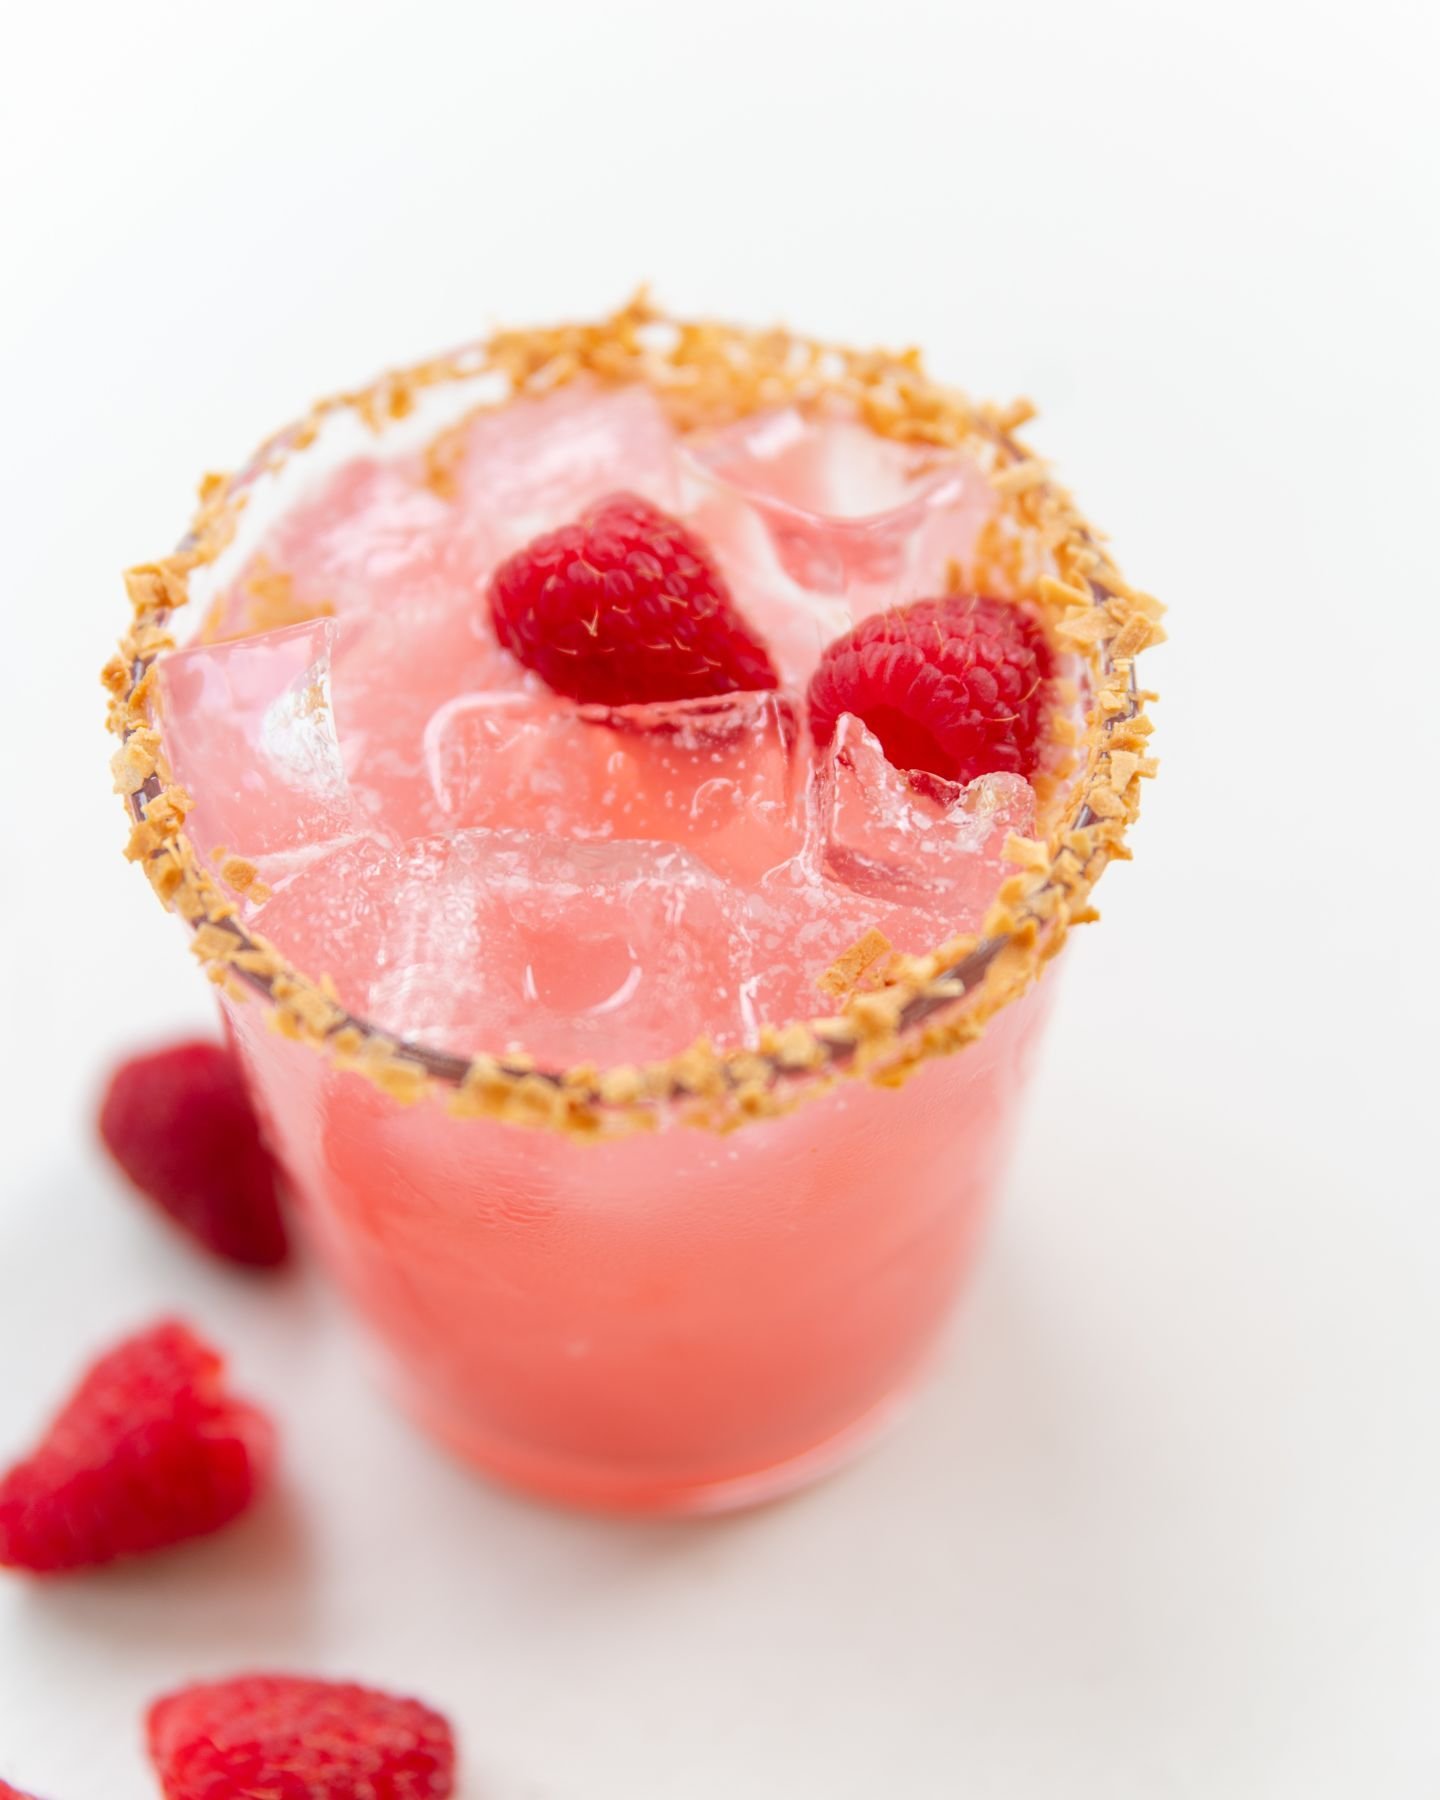 Our Cinco Margarita Series is BACK!

These delicious margaritas are available all month long! Which do you want to try?

🥥 RASPBERRY COCONUT
Coraz&oacute;n Silver, coconut, raspberry, lime, toasted coconut flake rim
🌿 VERANO VERDE
Coraz&oacute;n Si